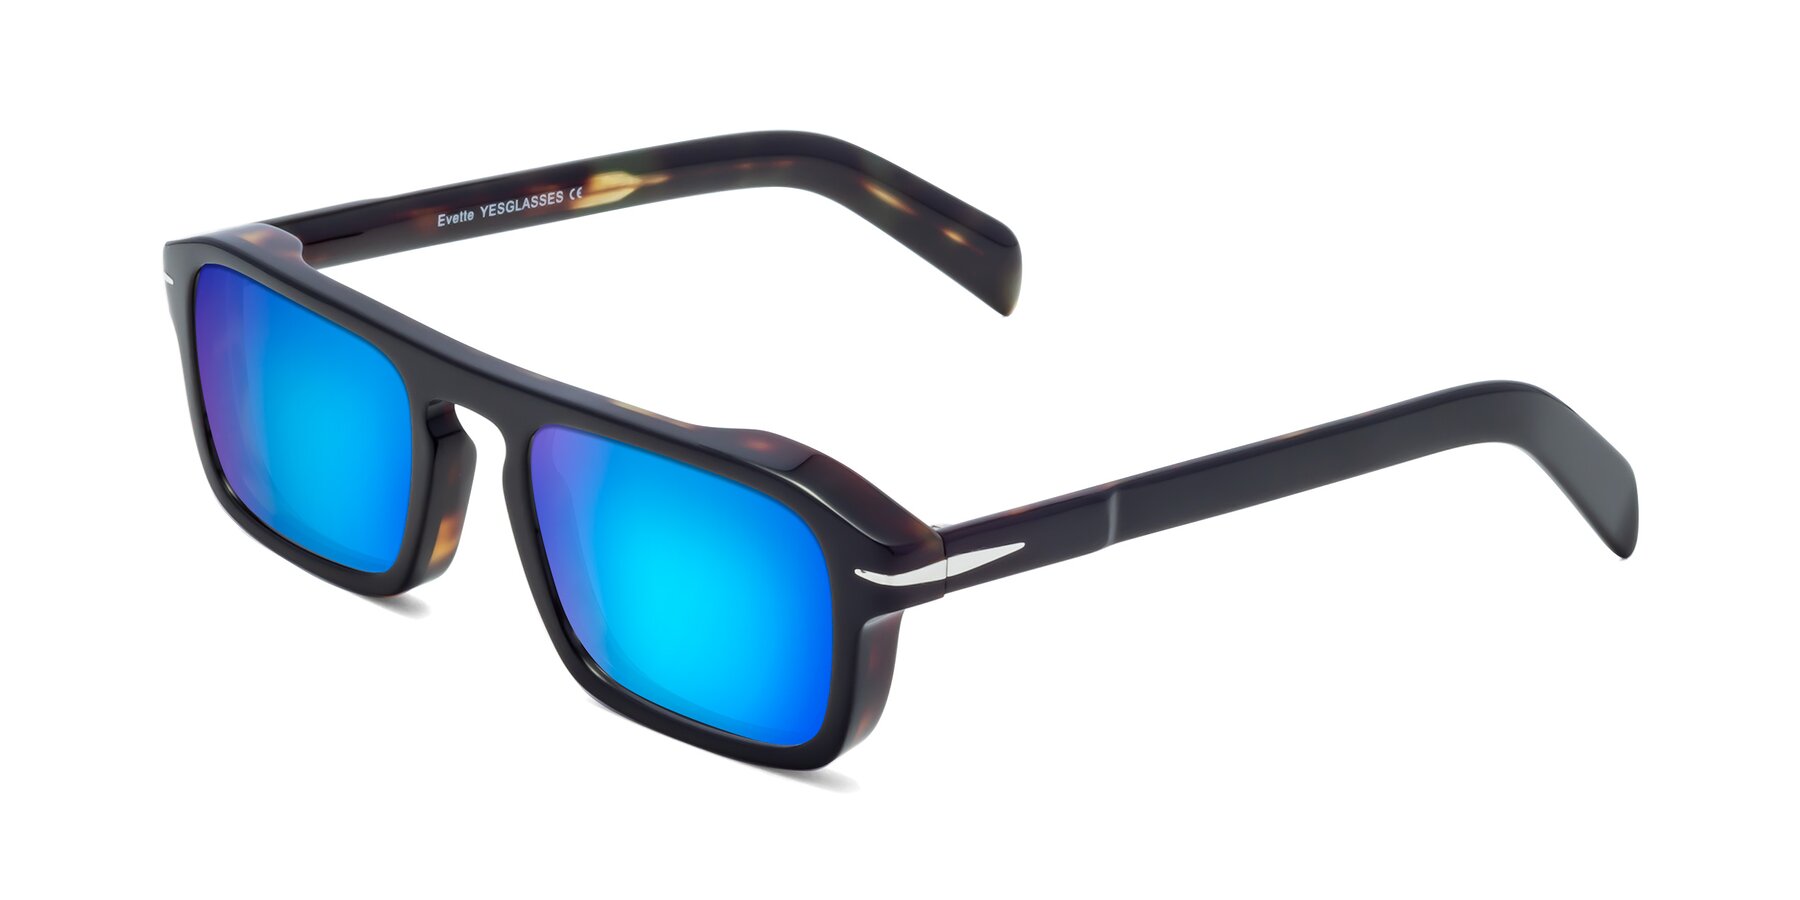 Angle of Evette in Black-Tortoise with Blue Mirrored Lenses